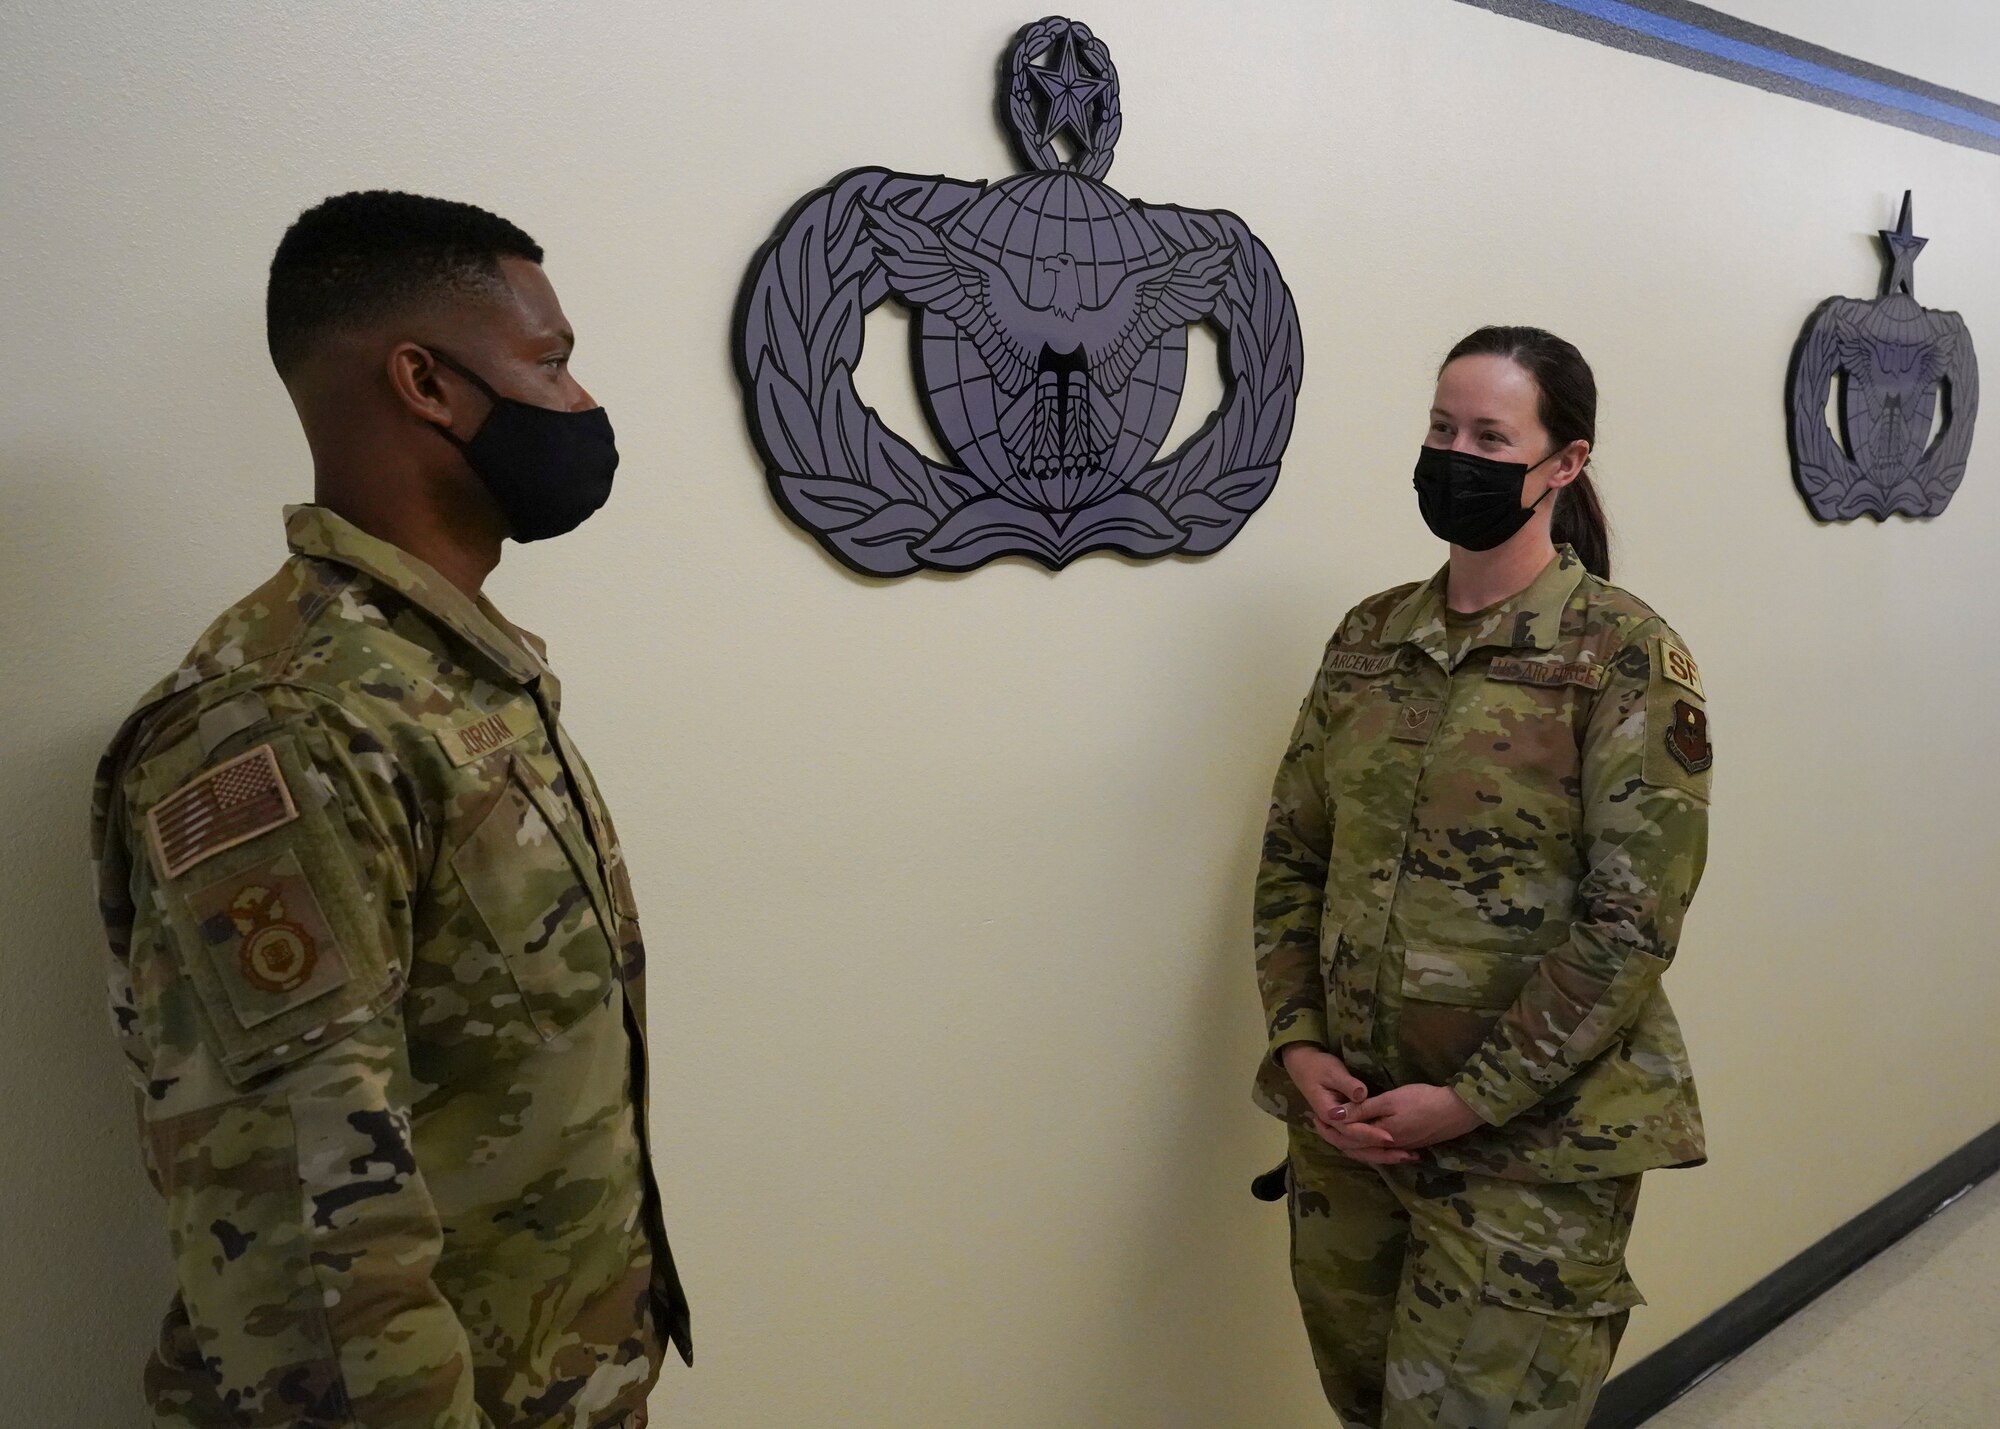 U.S. Air Force Senior Master Sgt. Travis Jordan, 81st Security Forces Squadron operation superintendent, helps Staff Sgt. Jessica Arceneaux, 81st SFS commander support staff NCO in charge inside the security forces building at Keesler Air Forces Base, Mississippi, April 29, 2021. Jordan serves as a mentor for the Airmen in his unit.